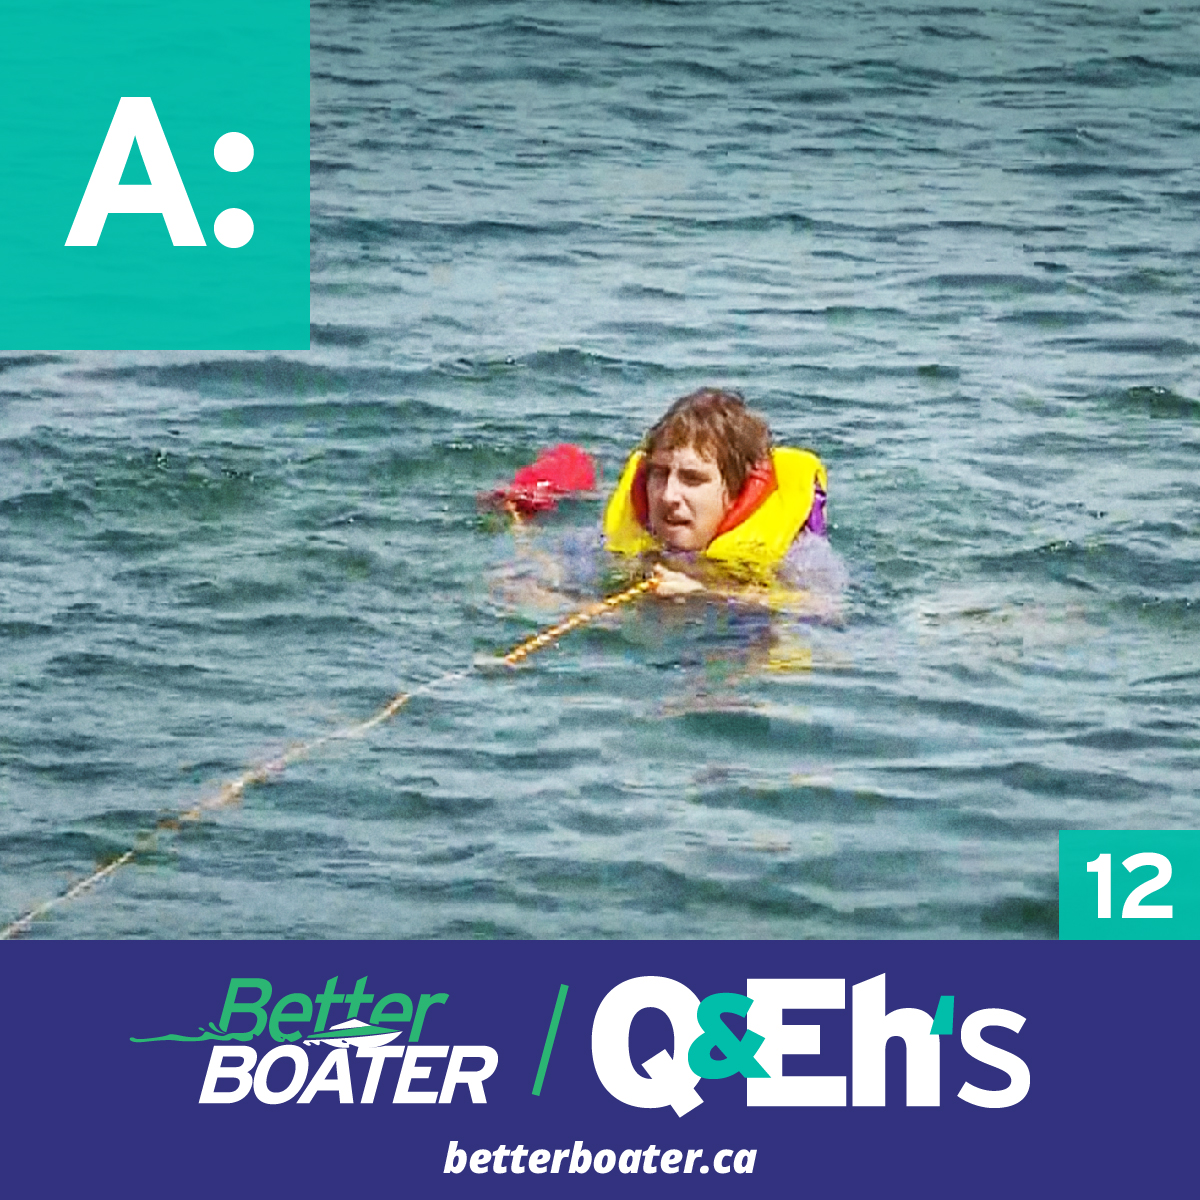 https://betterboater.ca/Safety%20Equipment%20Where